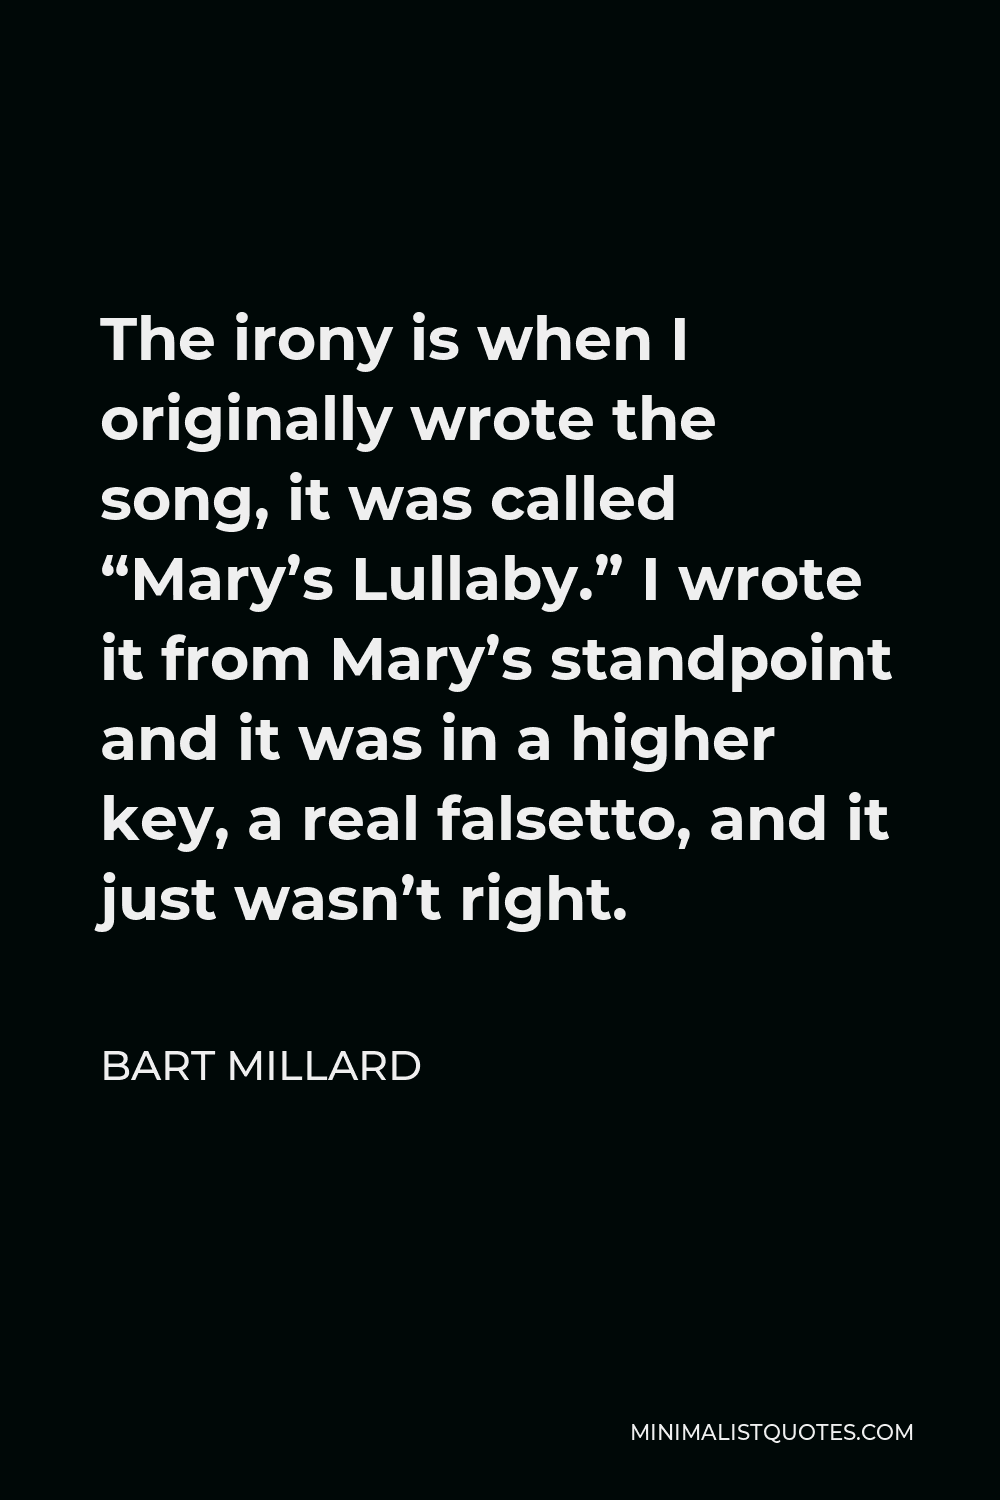 Bart Millard Quote - The irony is when I originally wrote the song, it was called “Mary’s Lullaby.” I wrote it from Mary’s standpoint and it was in a higher key, a real falsetto, and it just wasn’t right.